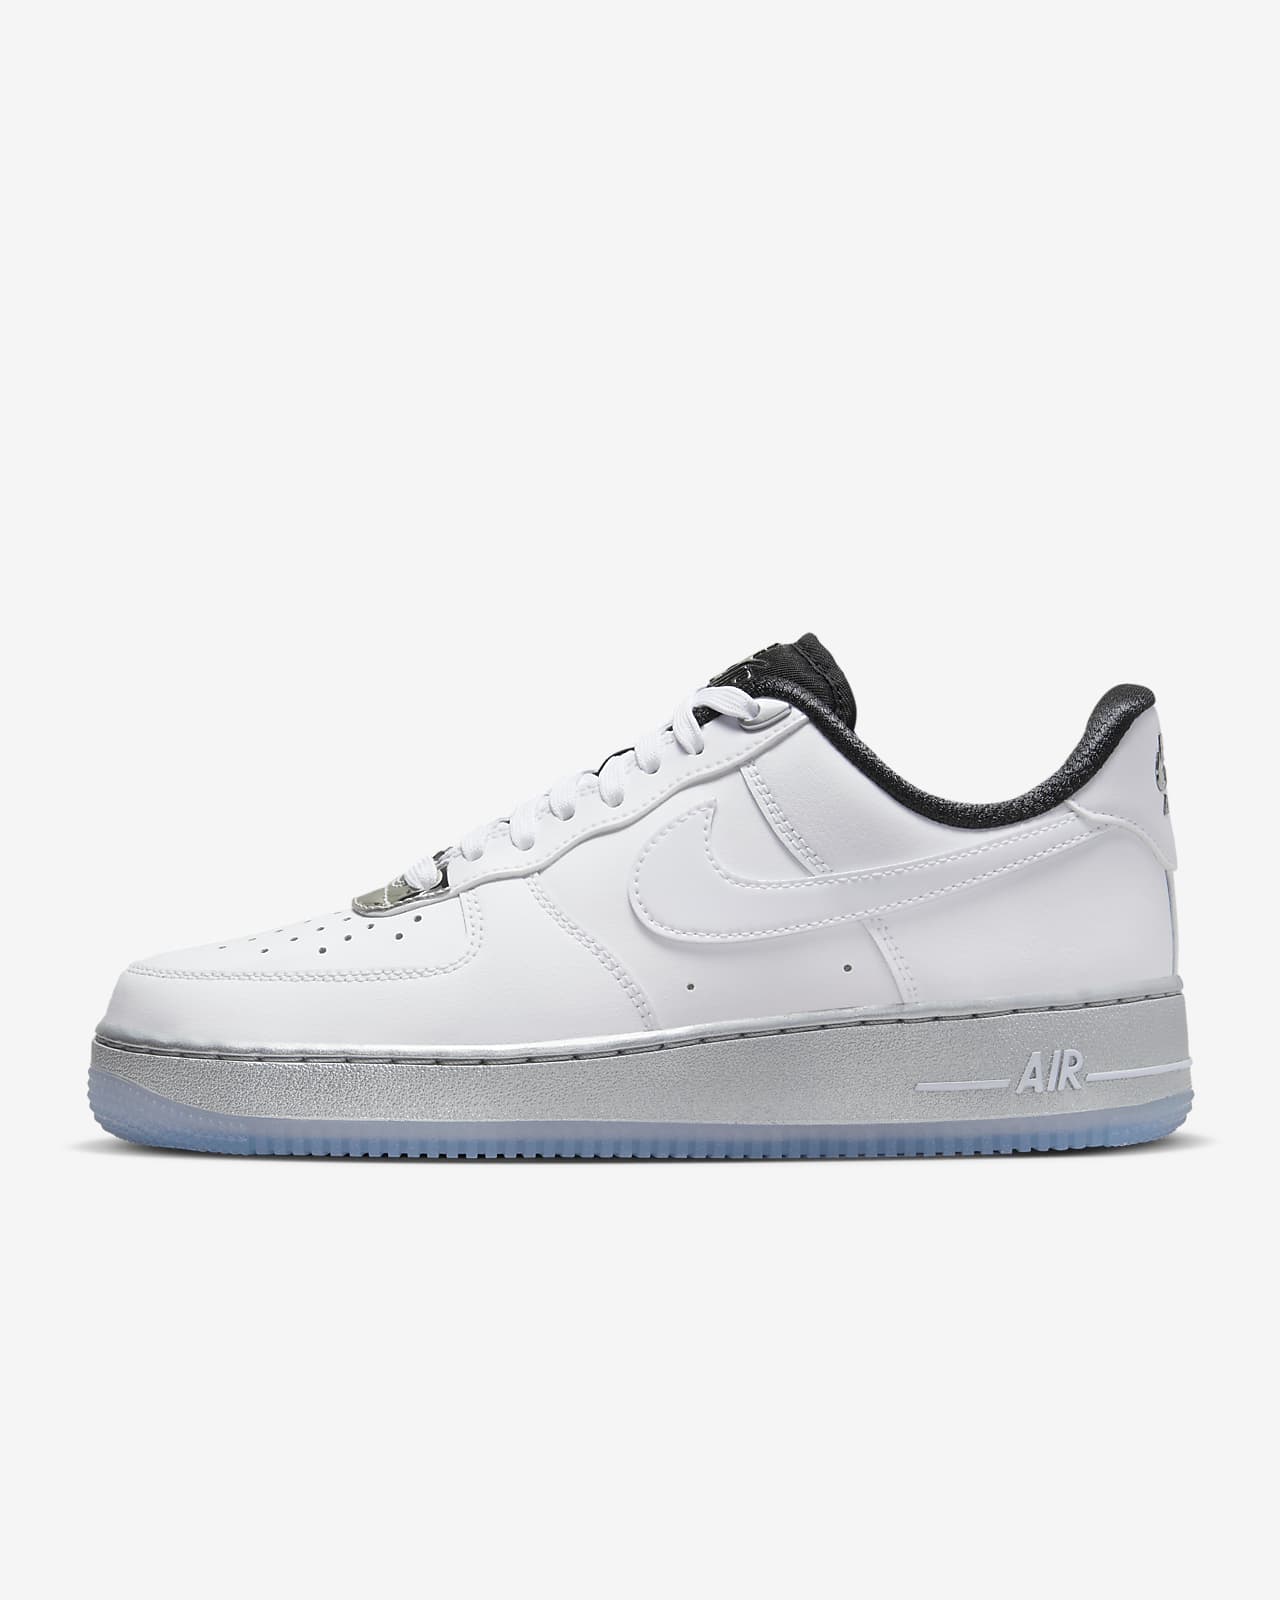 Nike Air Force 1 '07 Se Women'S Shoes. Nike Vn